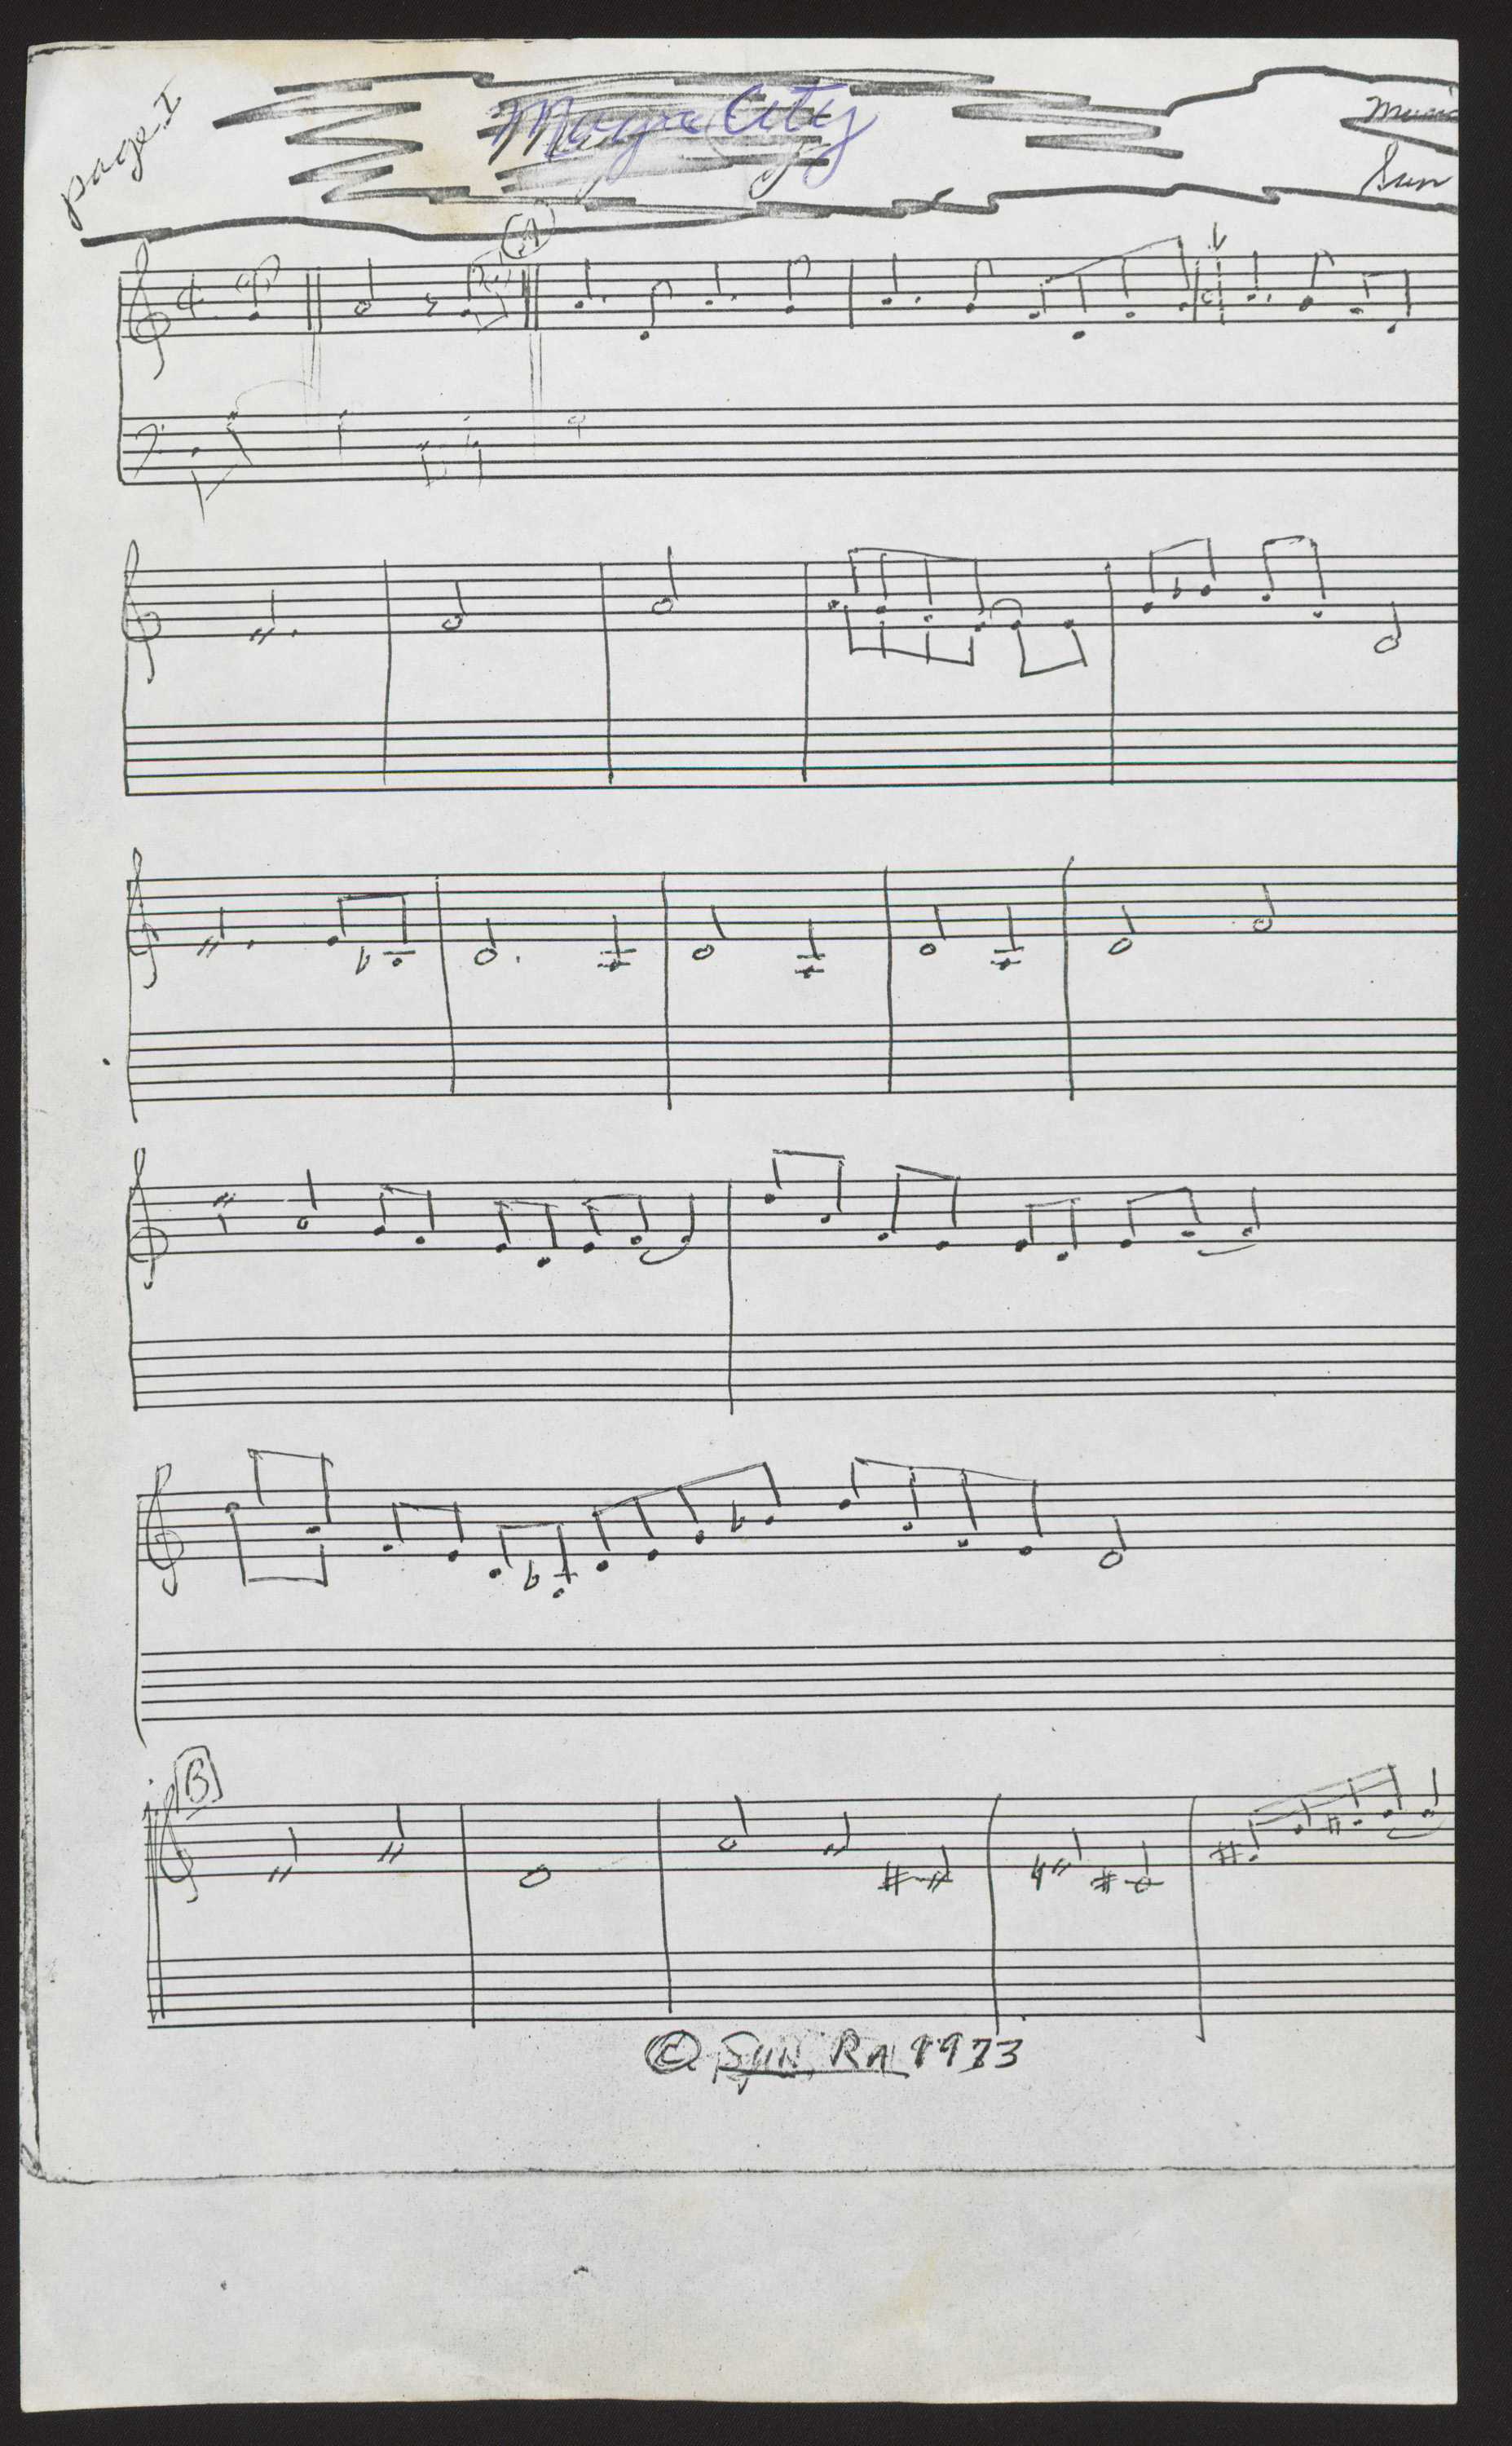 The music sheet for "Magic City". Hand drawn, the title of "Magic City" is written inside of a cloud like doodle.